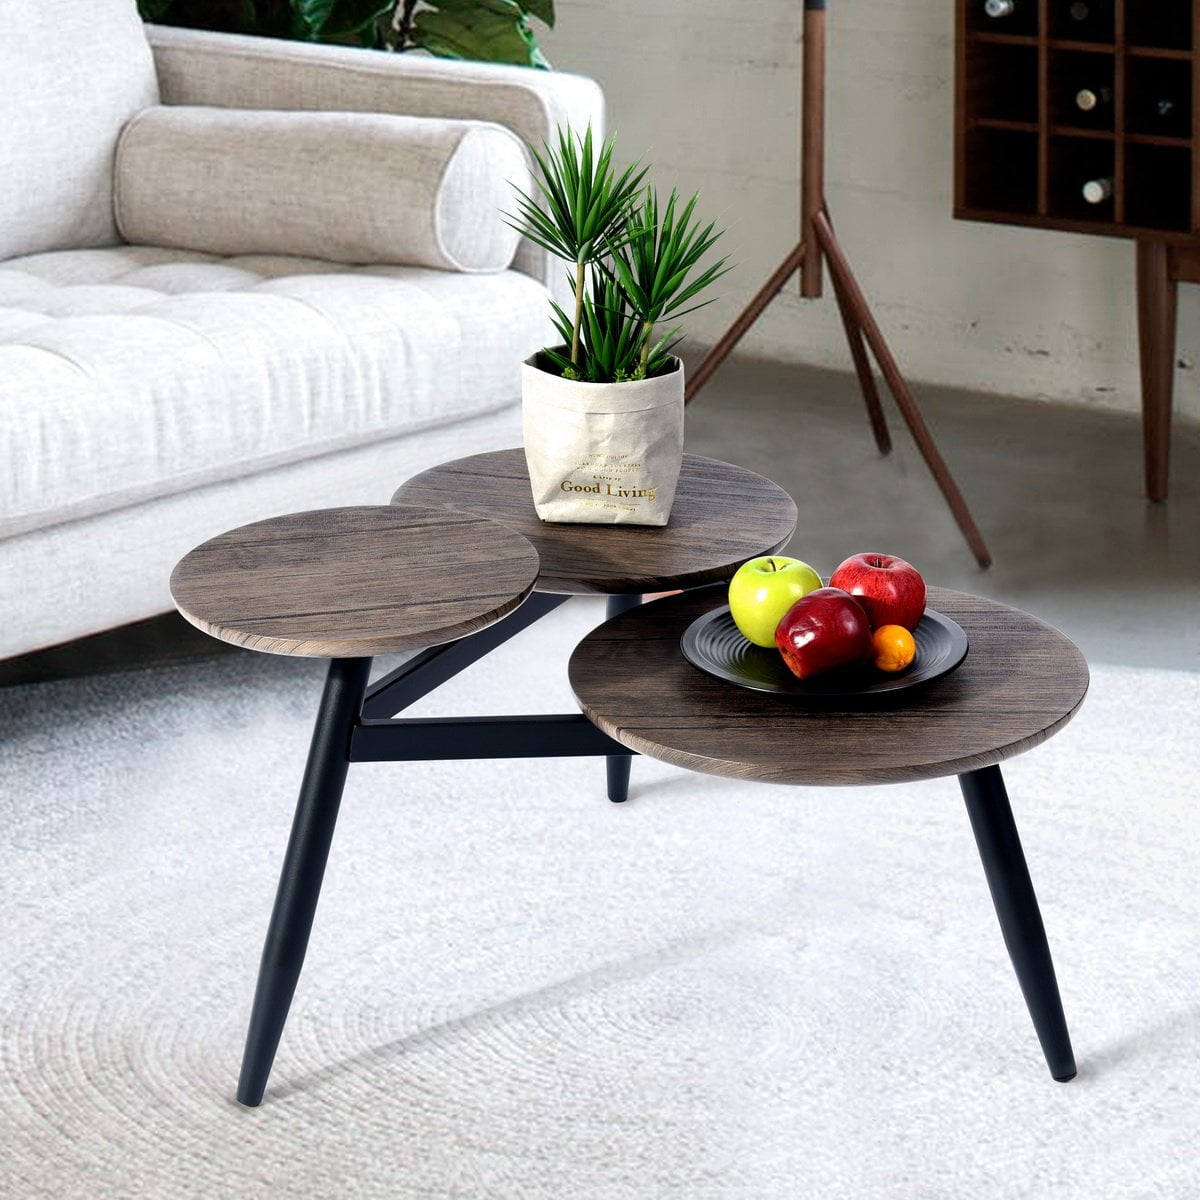 Topcobe Coffee Table, Small Wooden Round Sofa End Tables Sets for